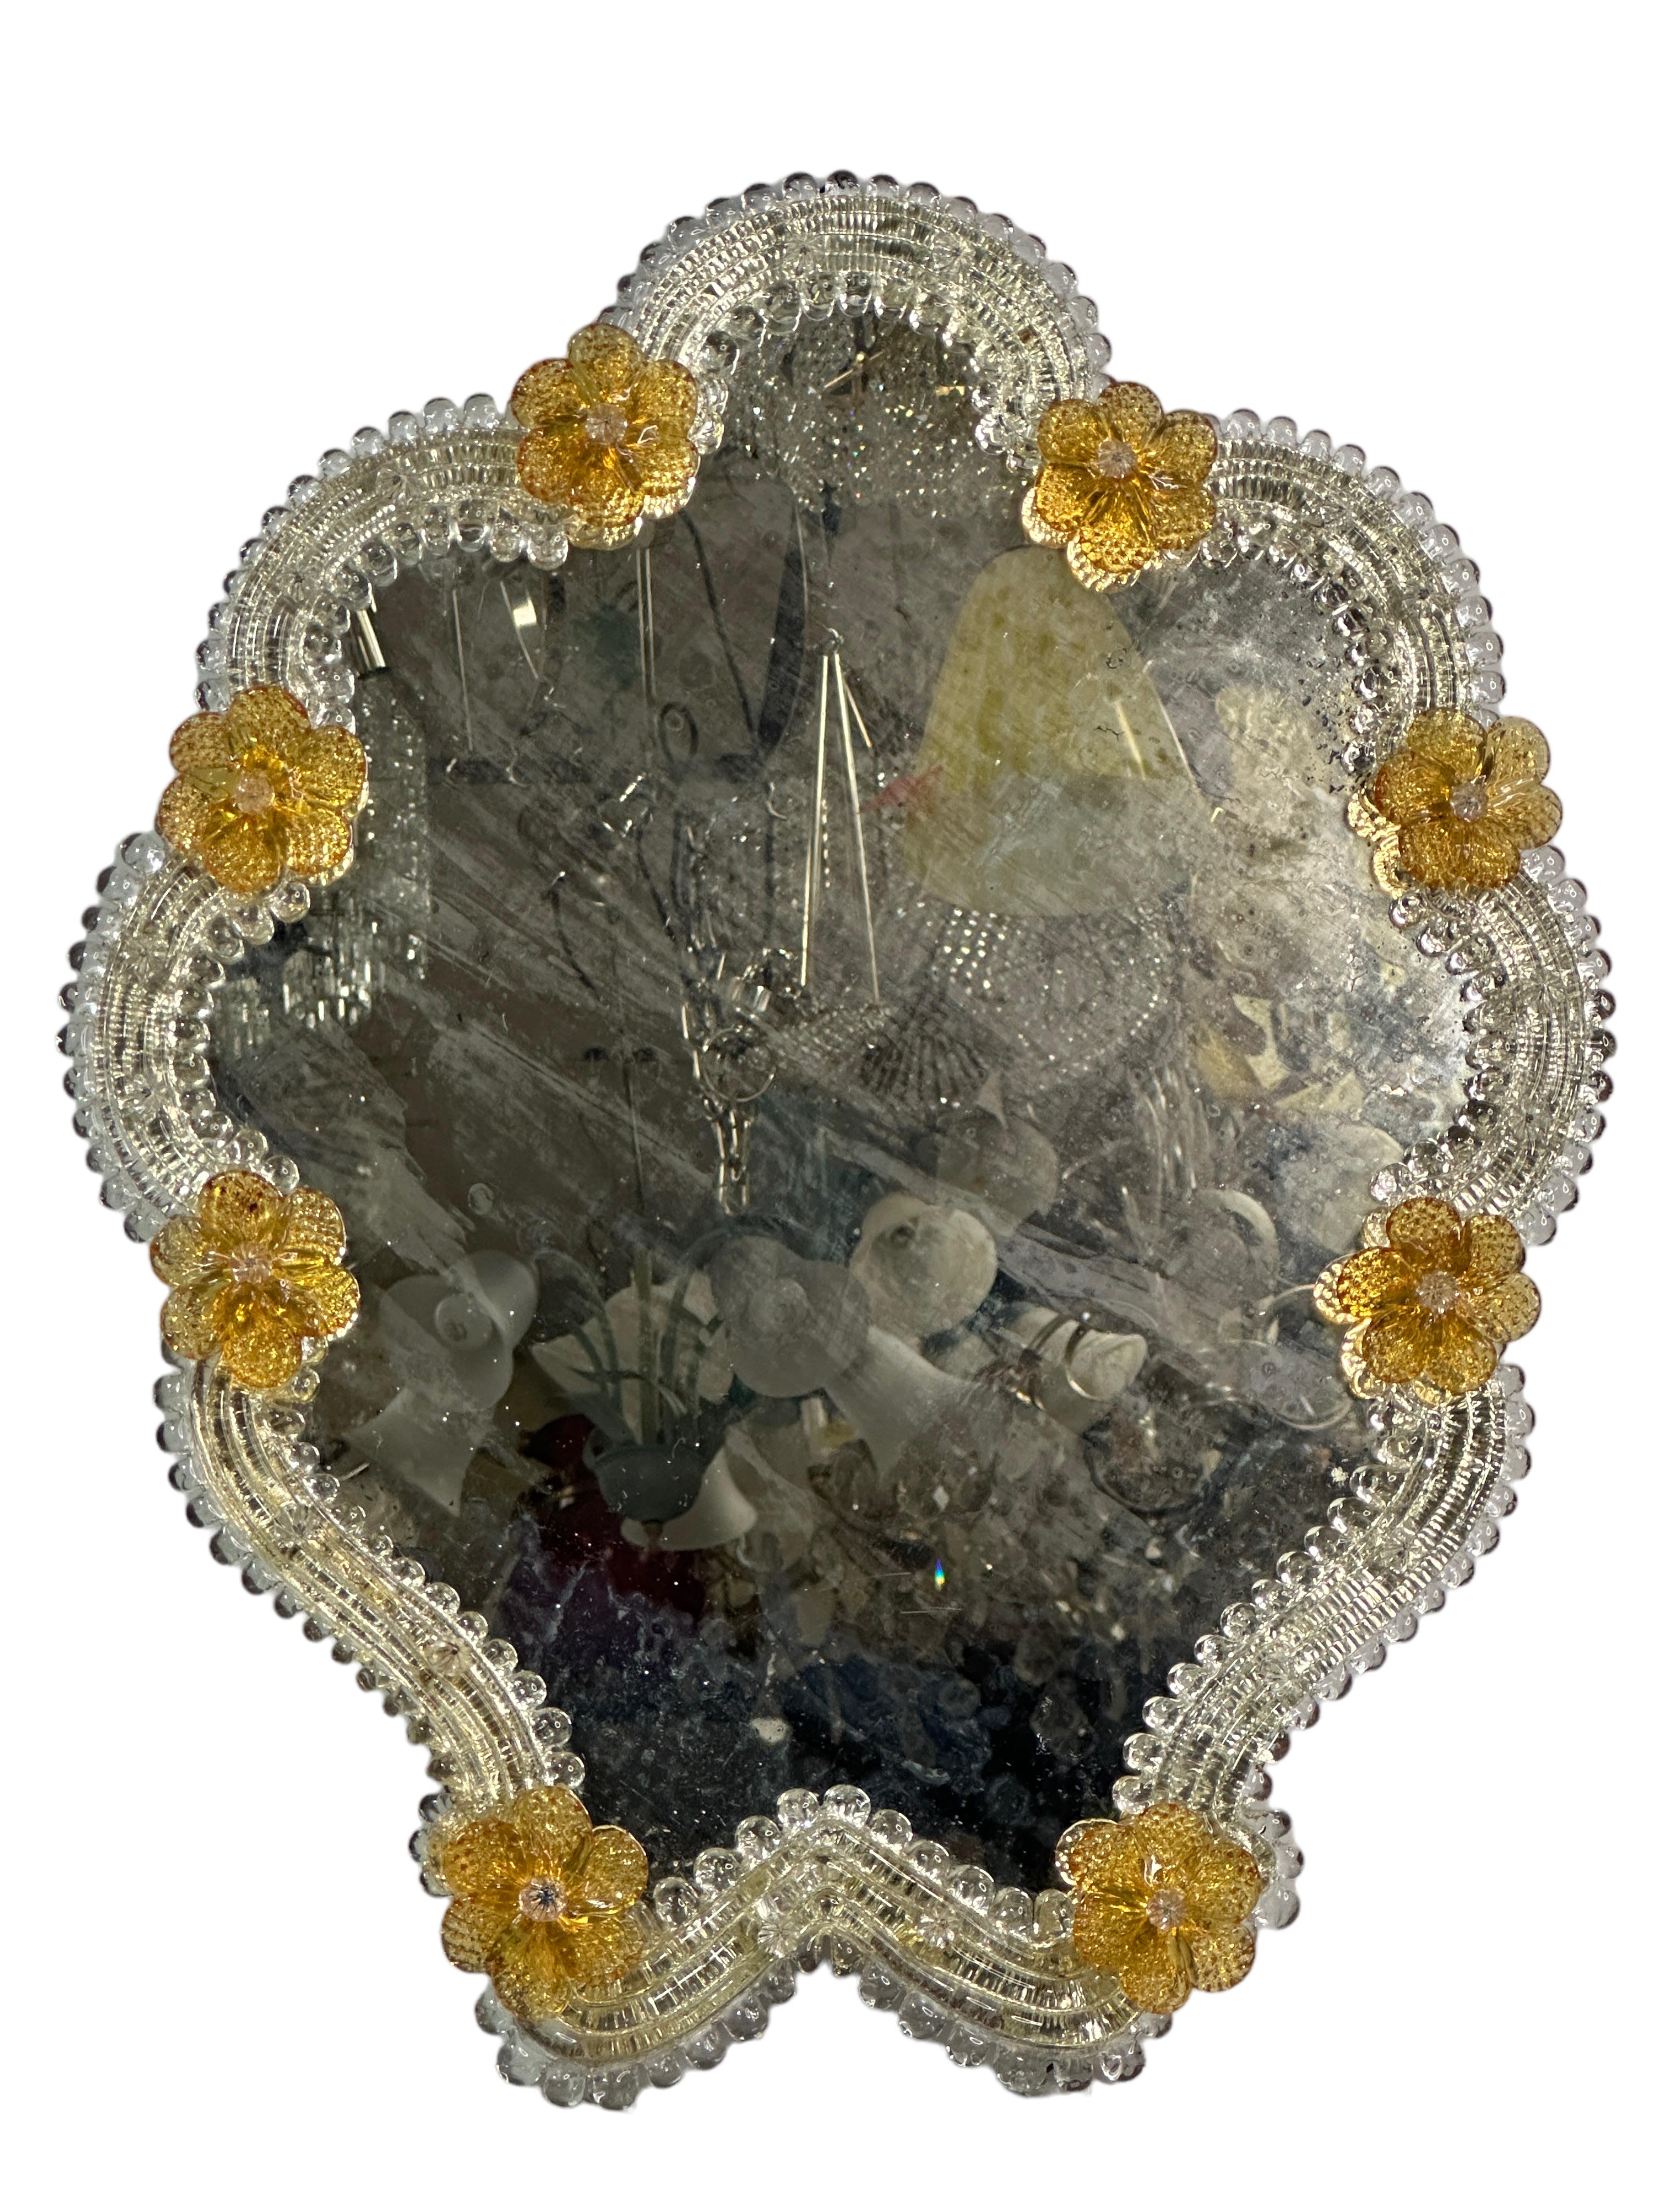 A stunning medium Murano glass mirror surrounded with handmade amber smoked glass flowers. Age approx. 1930s or older. Some blind spots and distressed parts in the mirror but this is old-age. With signs of wear as expected with age and use.